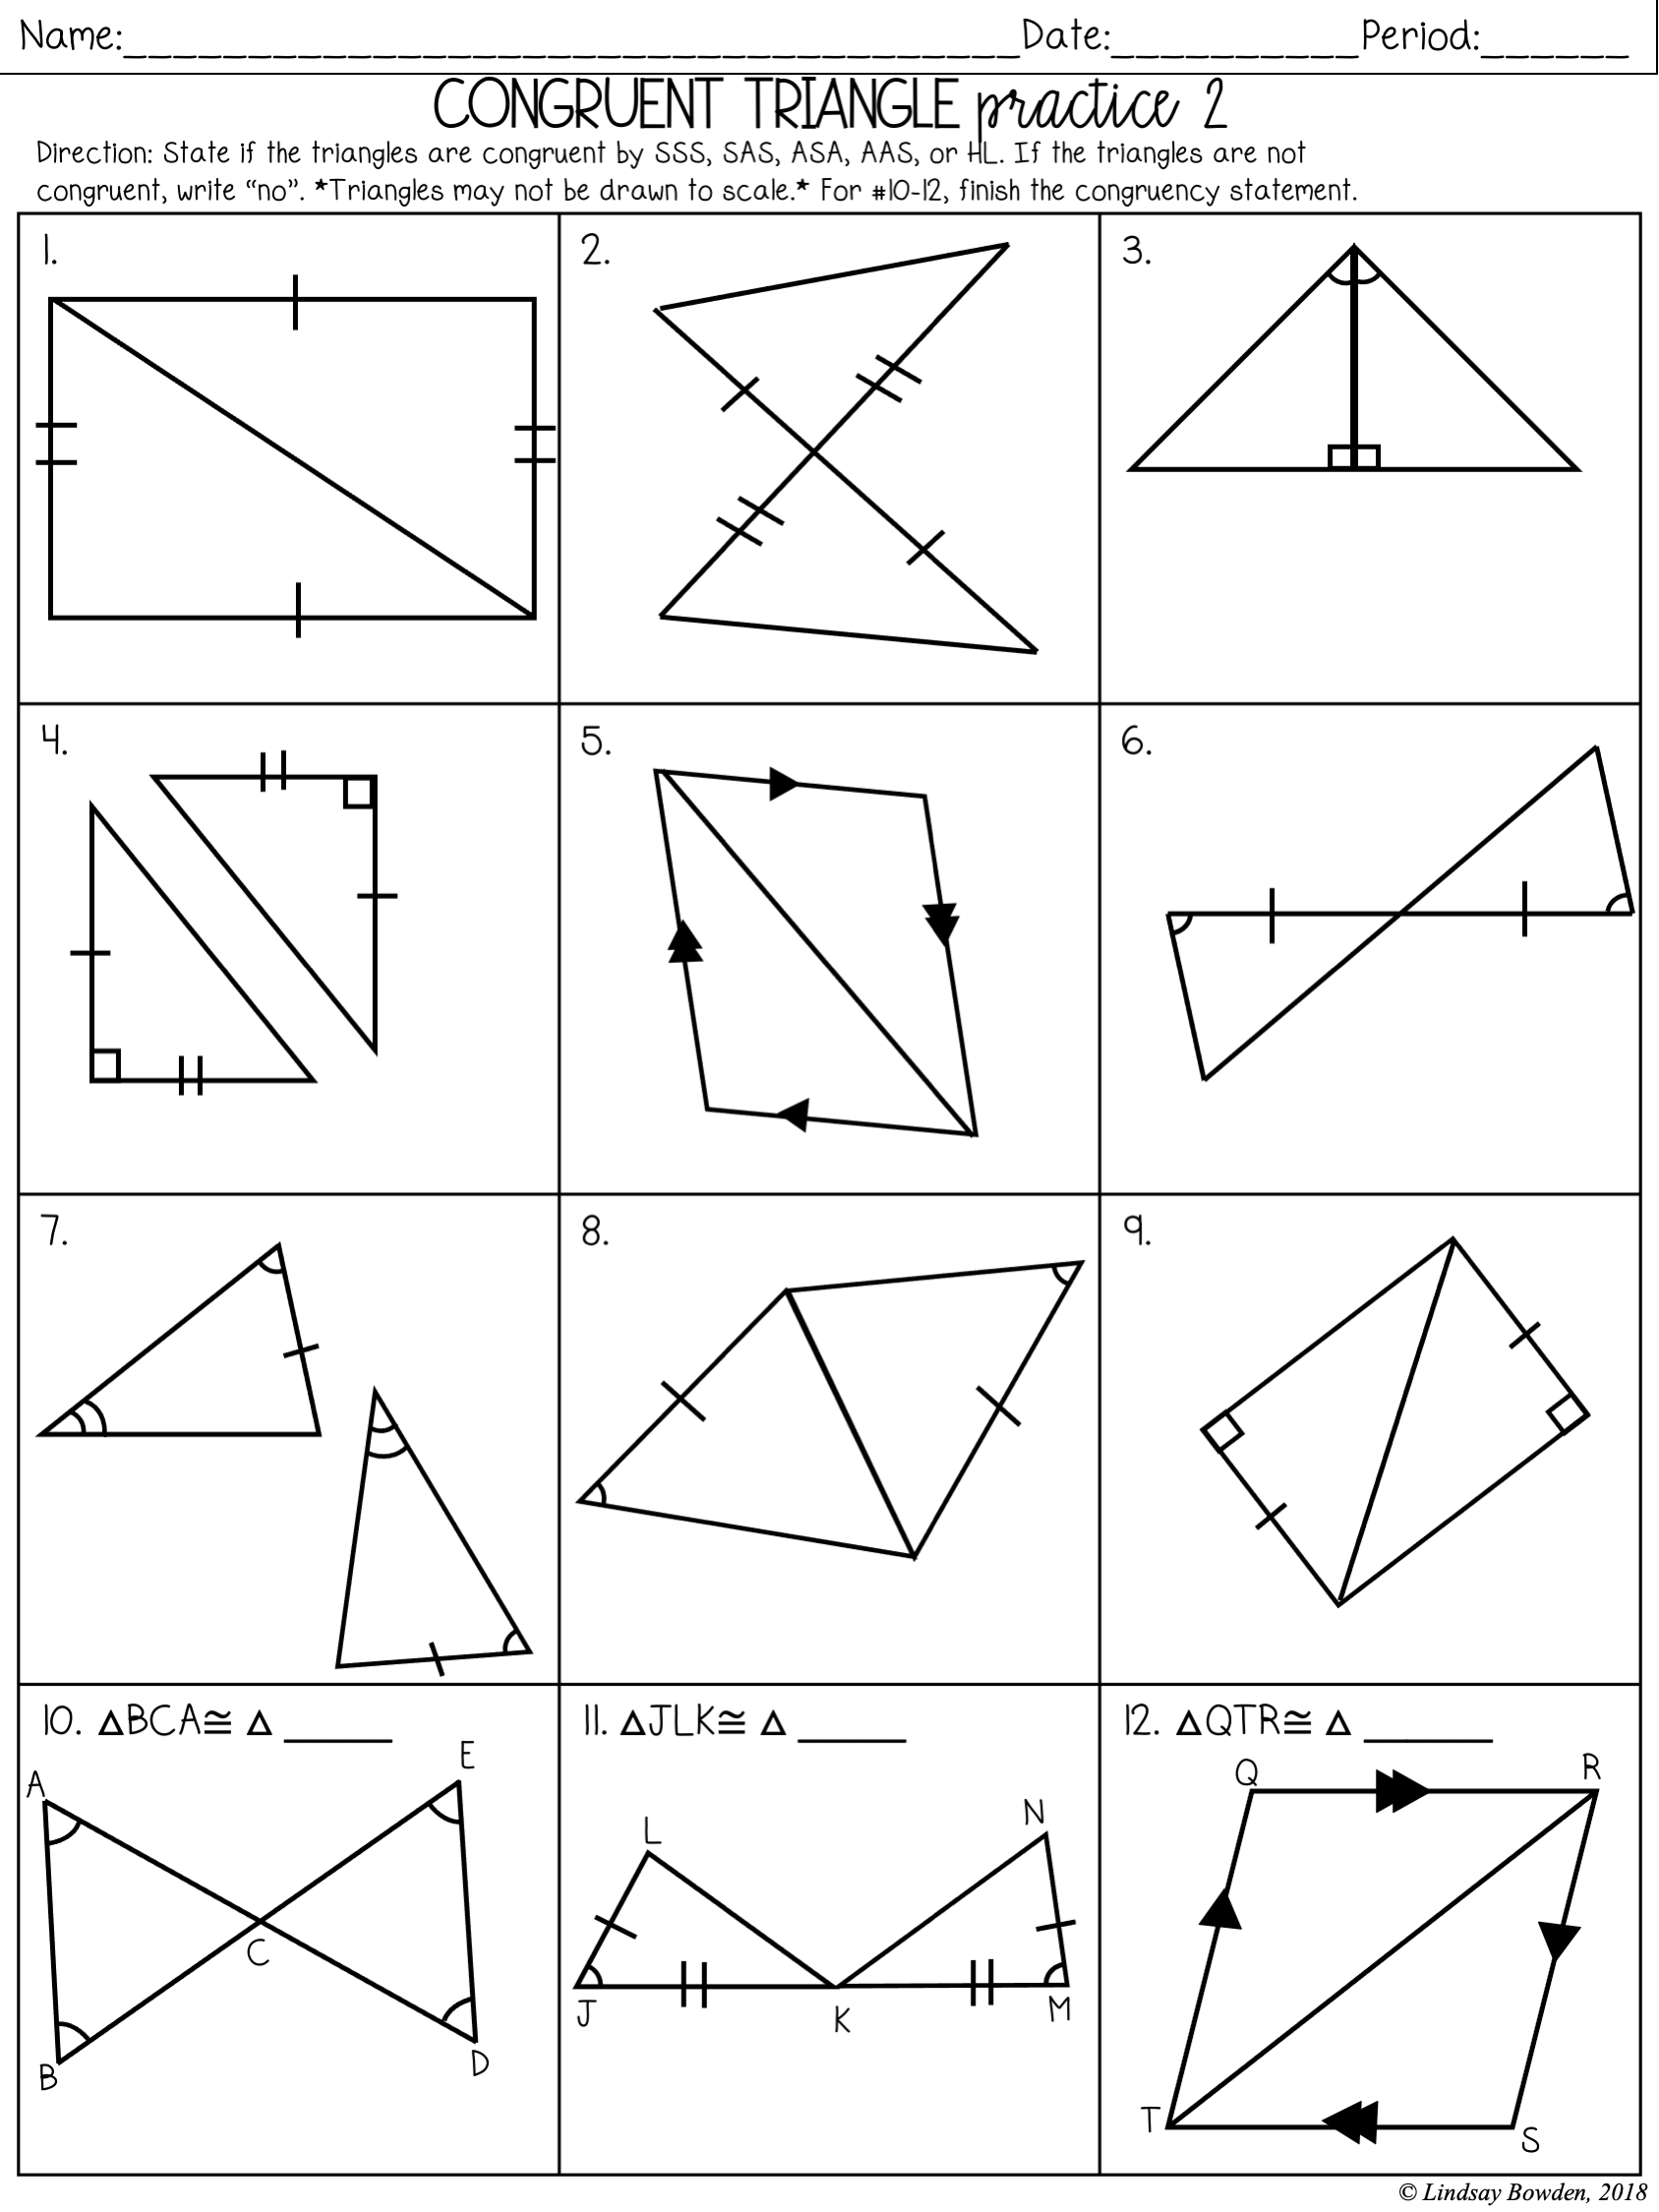 Congruent Triangles Notes and Worksheets - Lindsay Bowden In Triangle Congruence Worksheet Answer Key